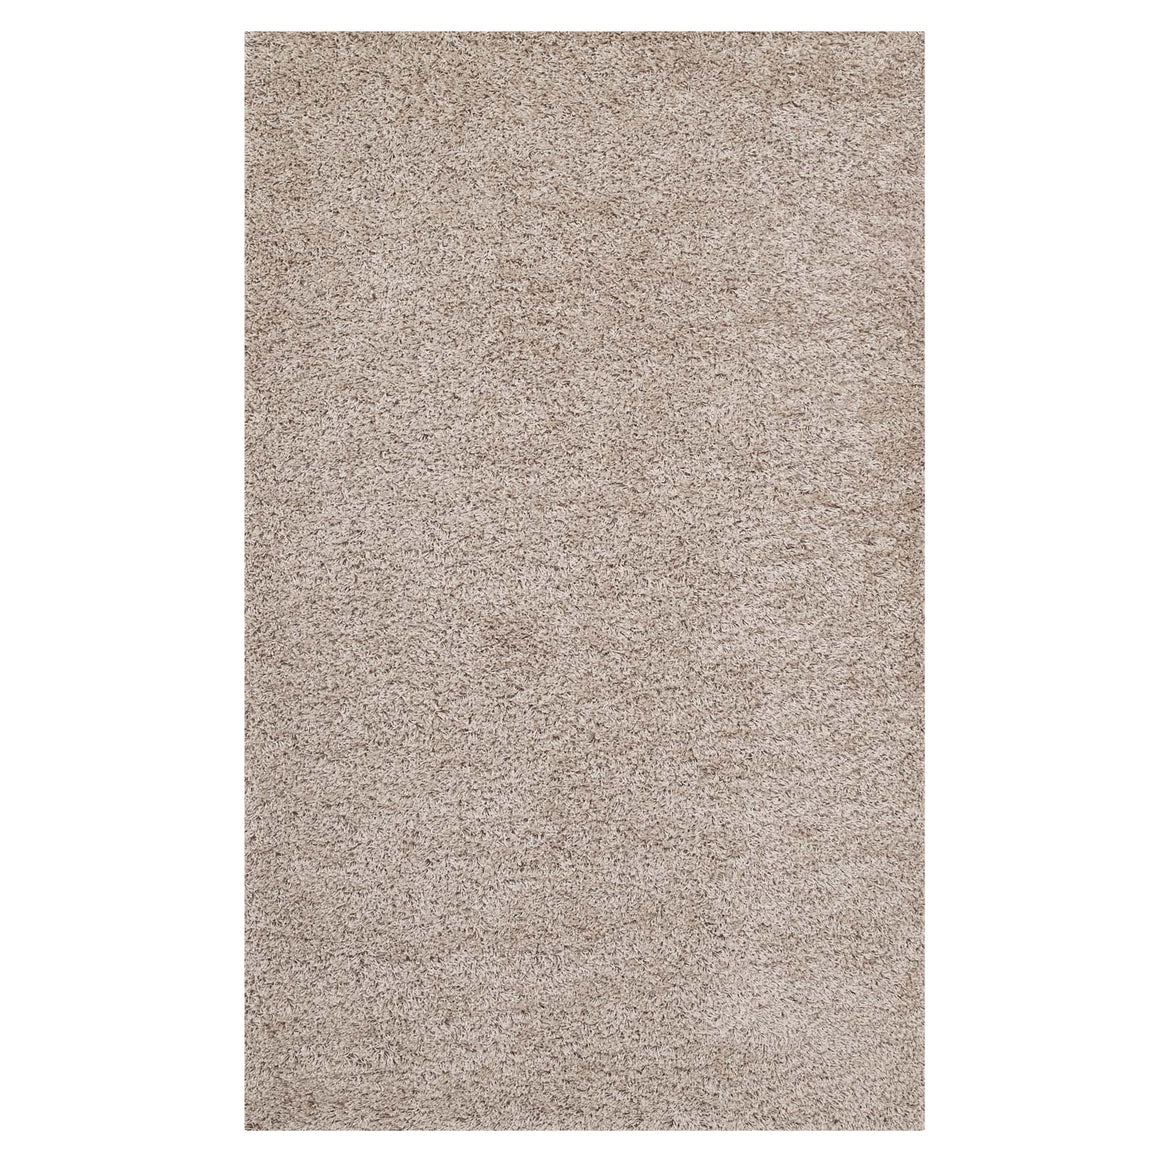 Enyssa Solid 8x10 Shag Area Rug  Beige and Ivory